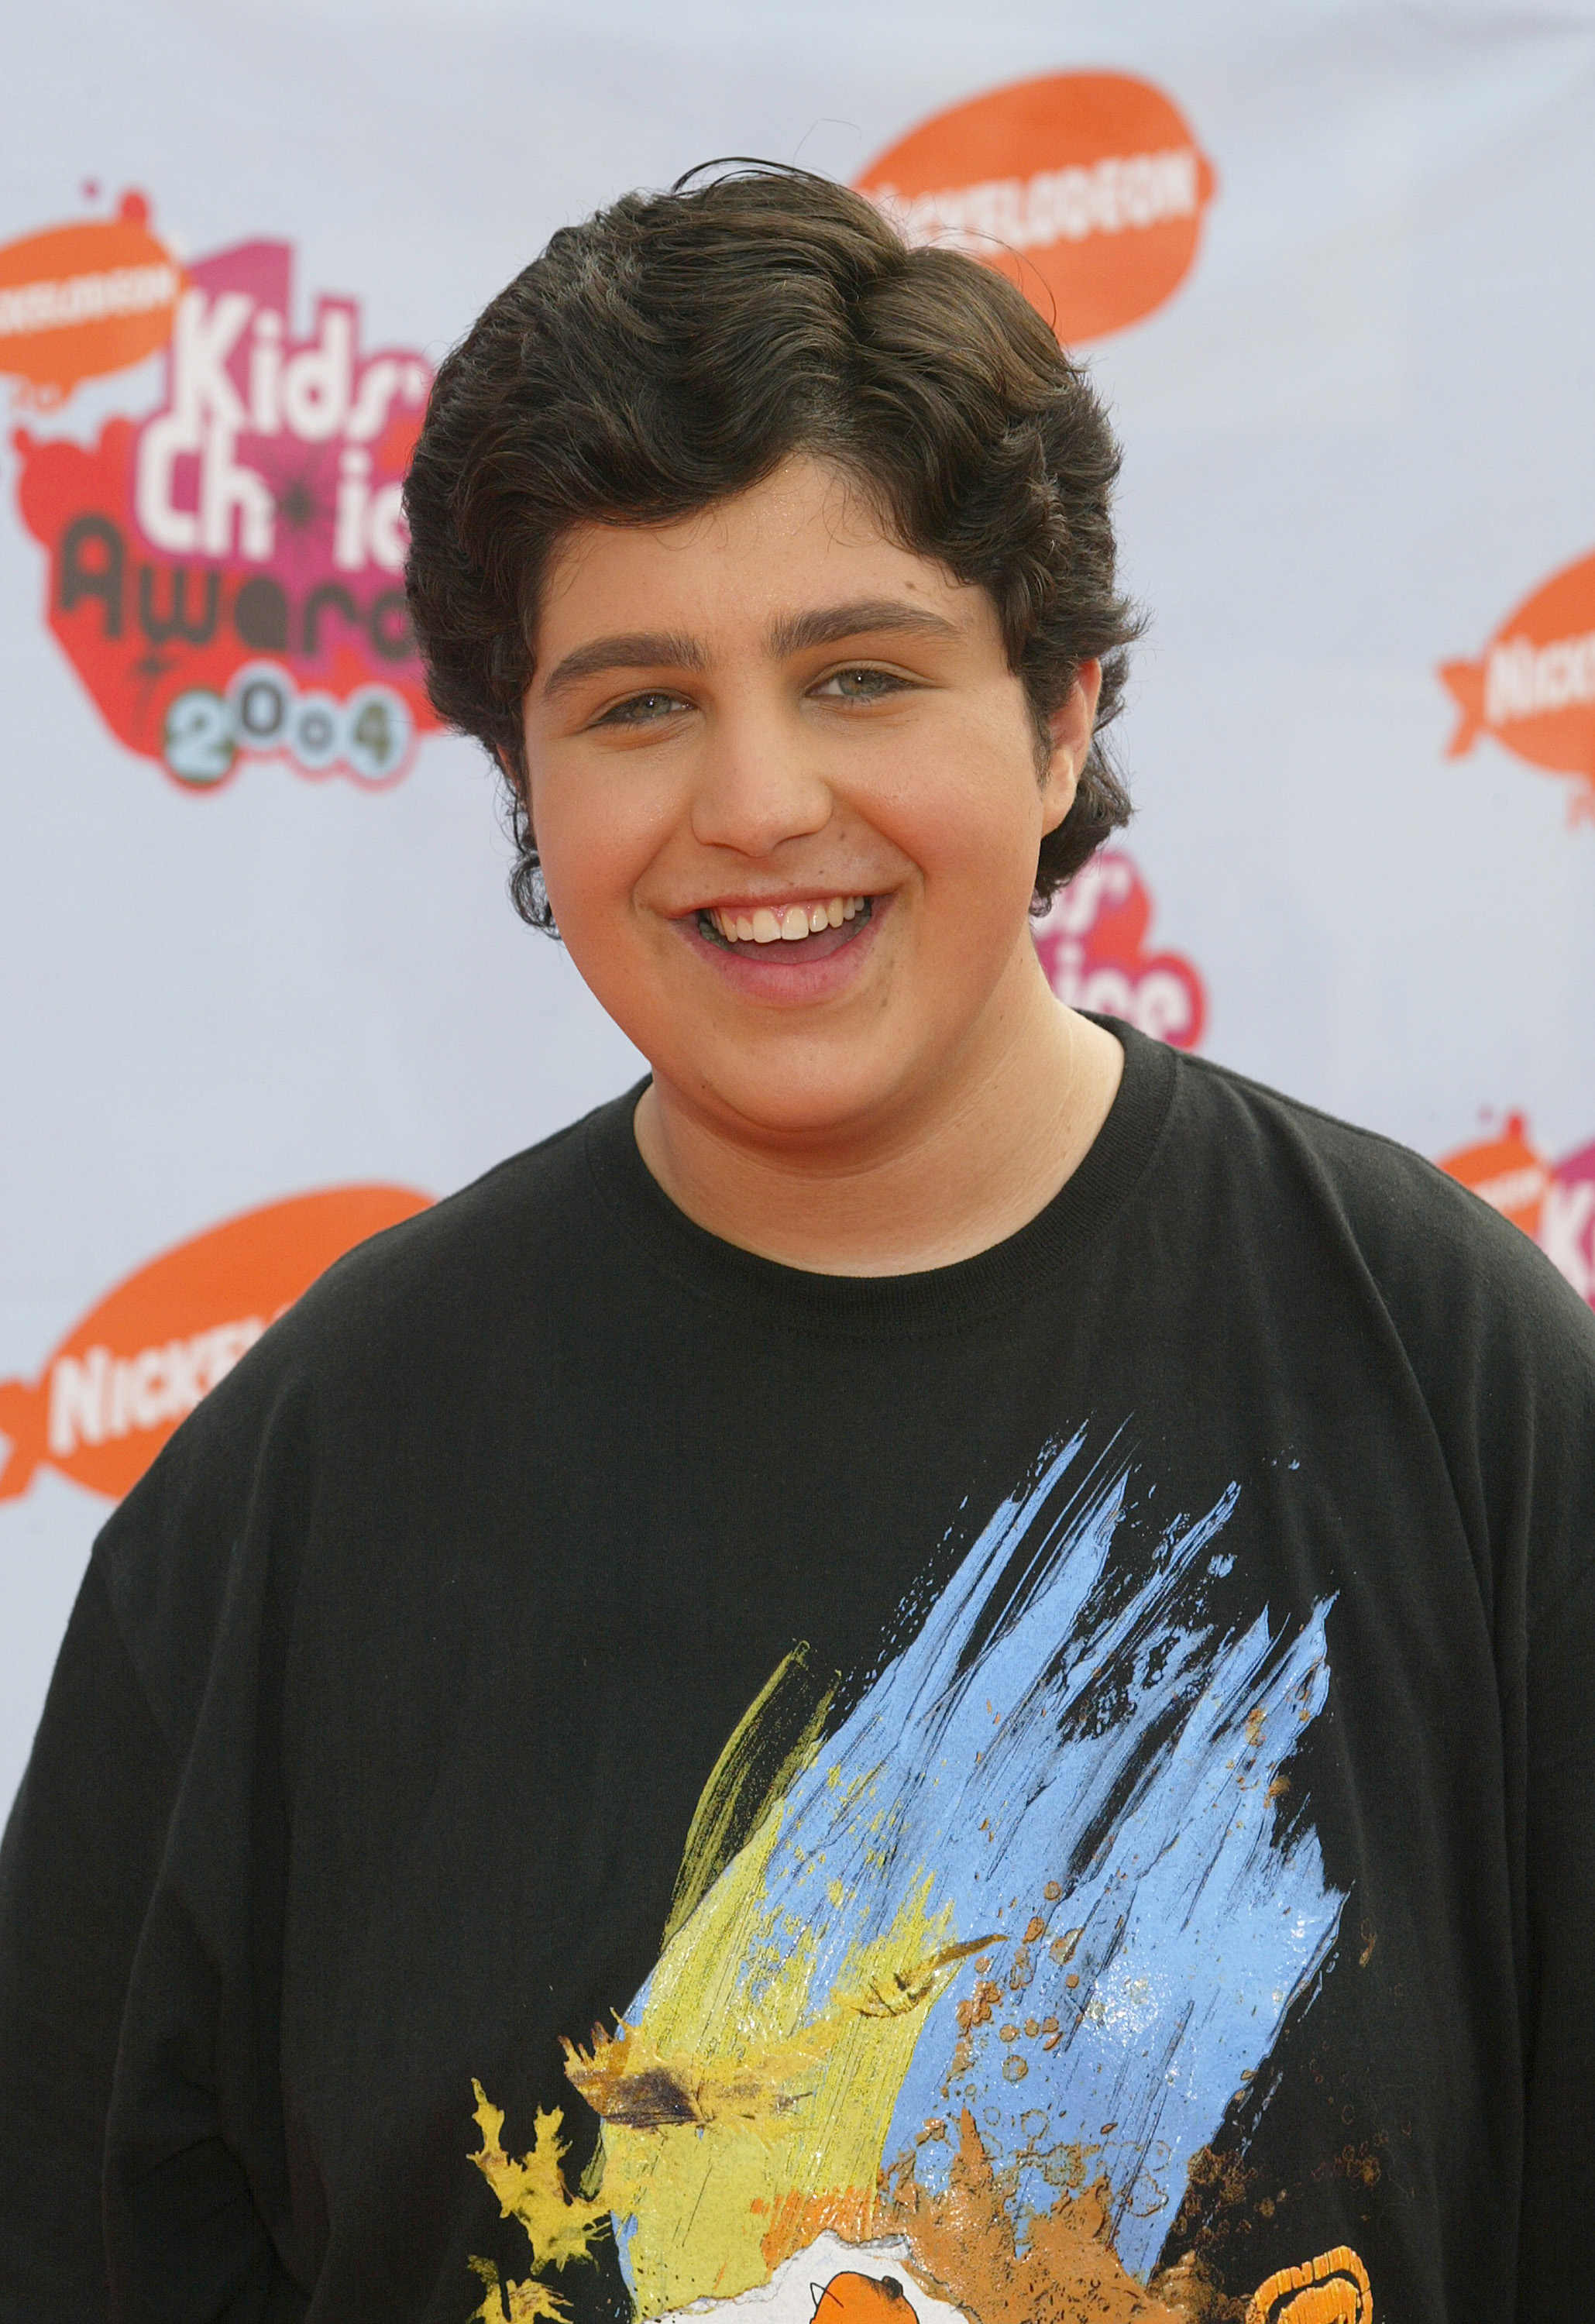 Josh Peck at a nickelodeon event